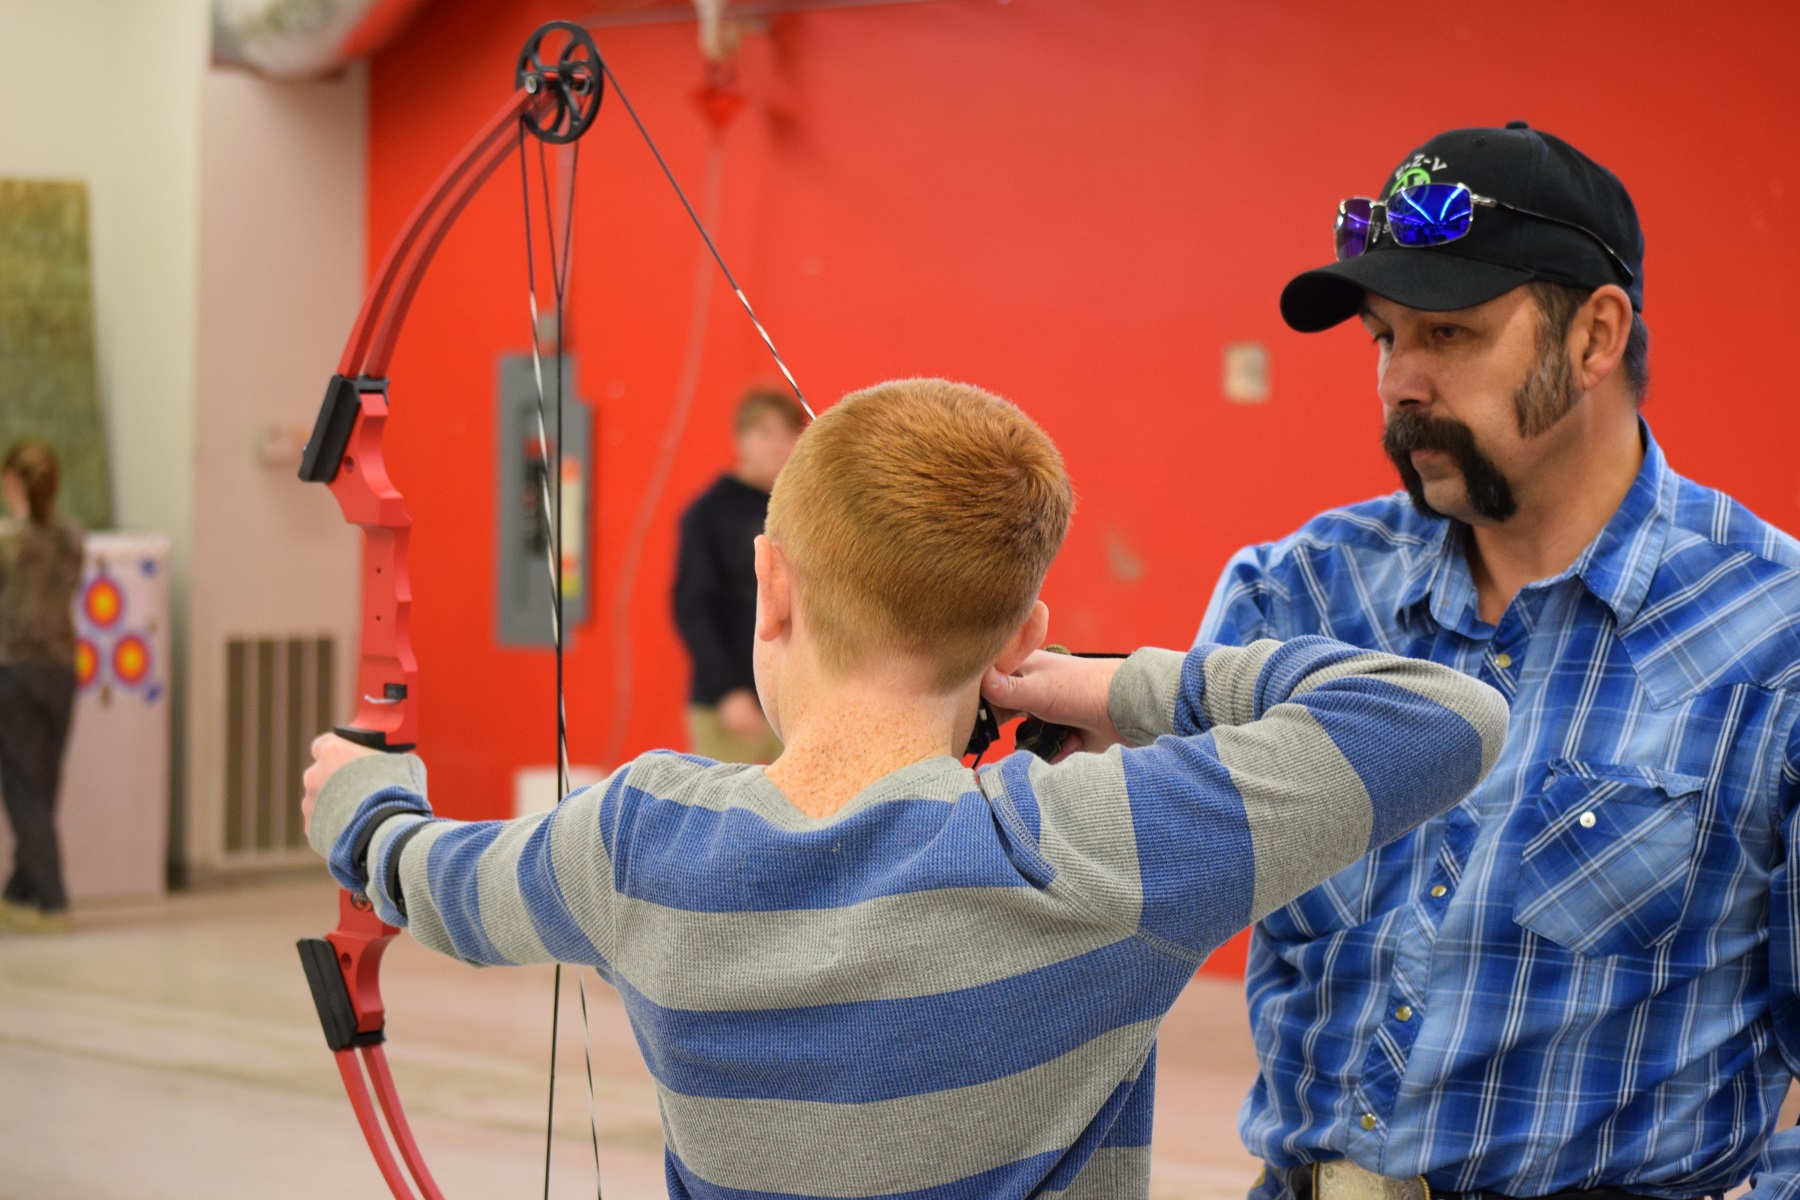 4-H leader coaches a young archer